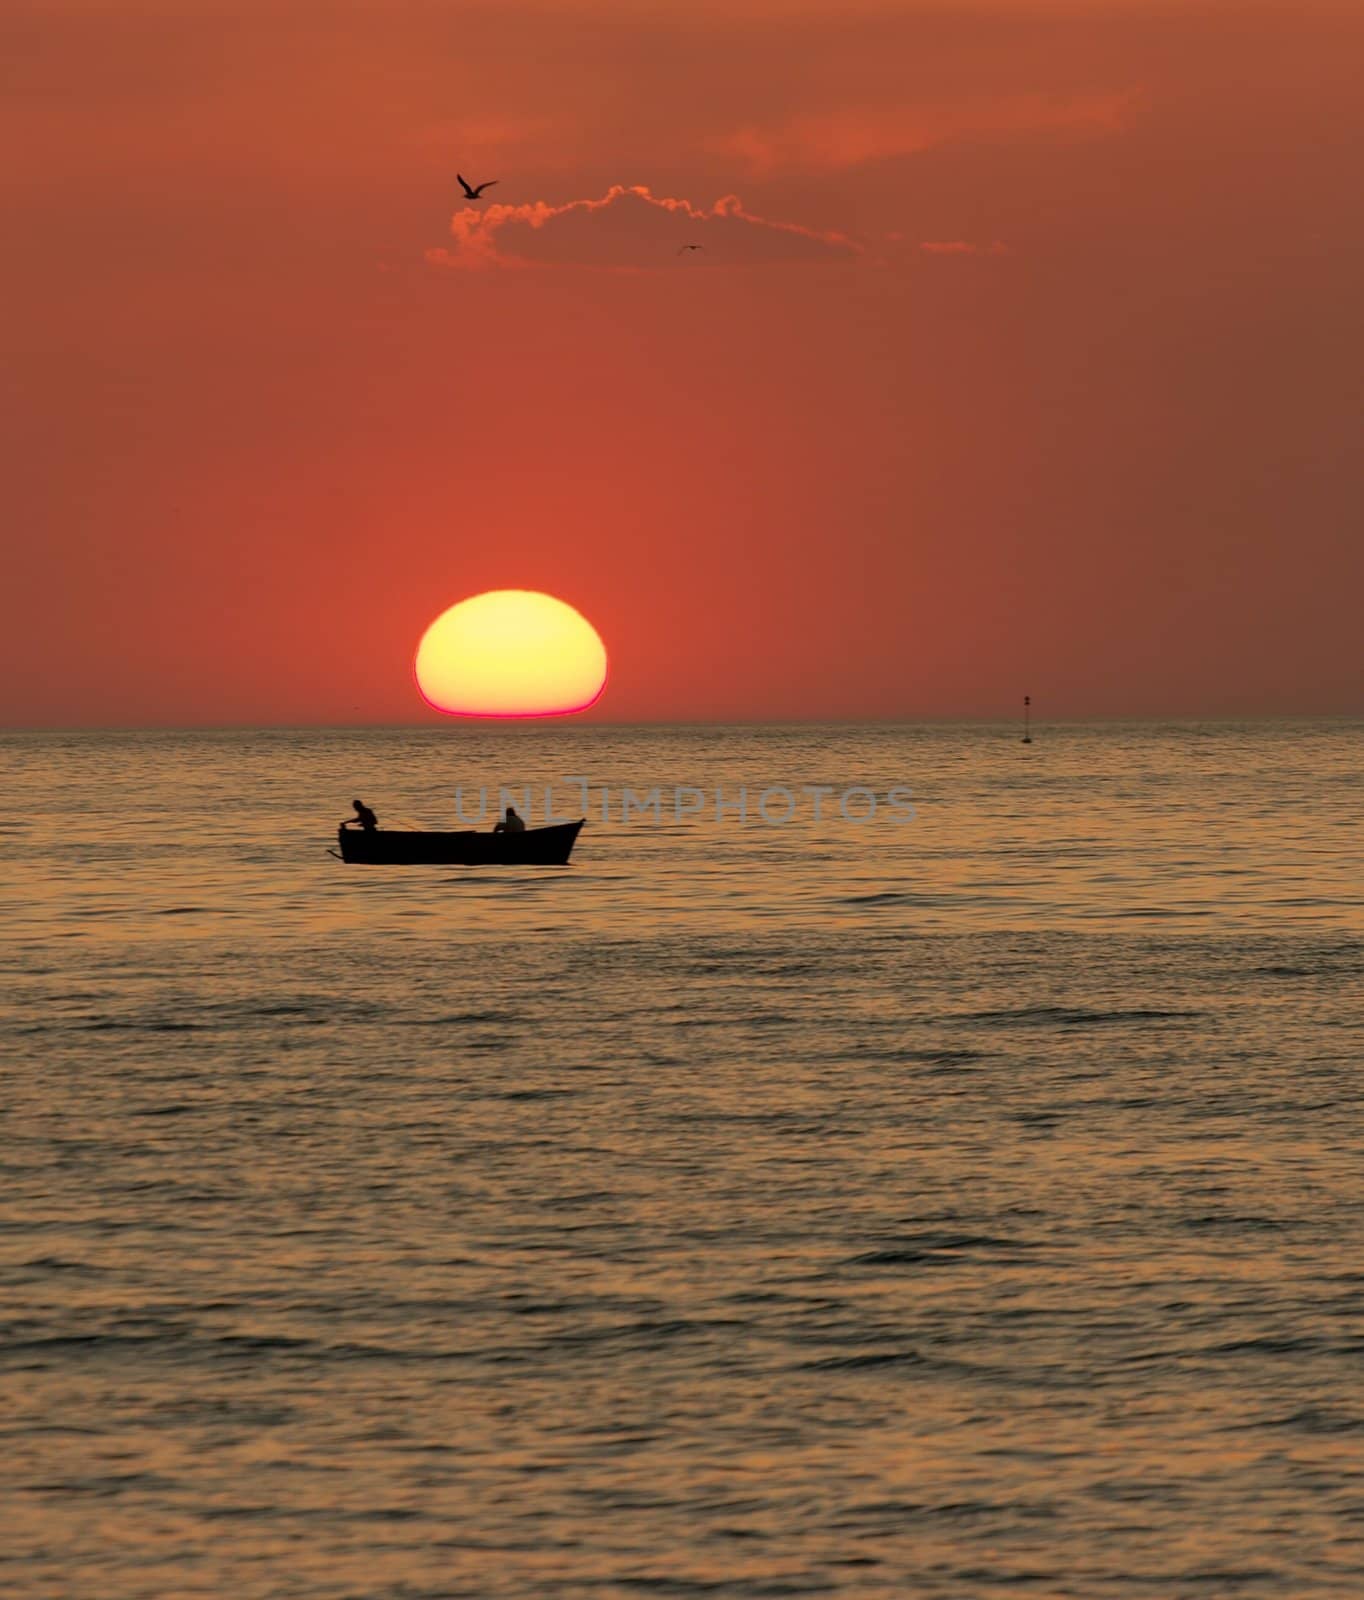 Sunset at the sea with the silhouette of a boat and a bird